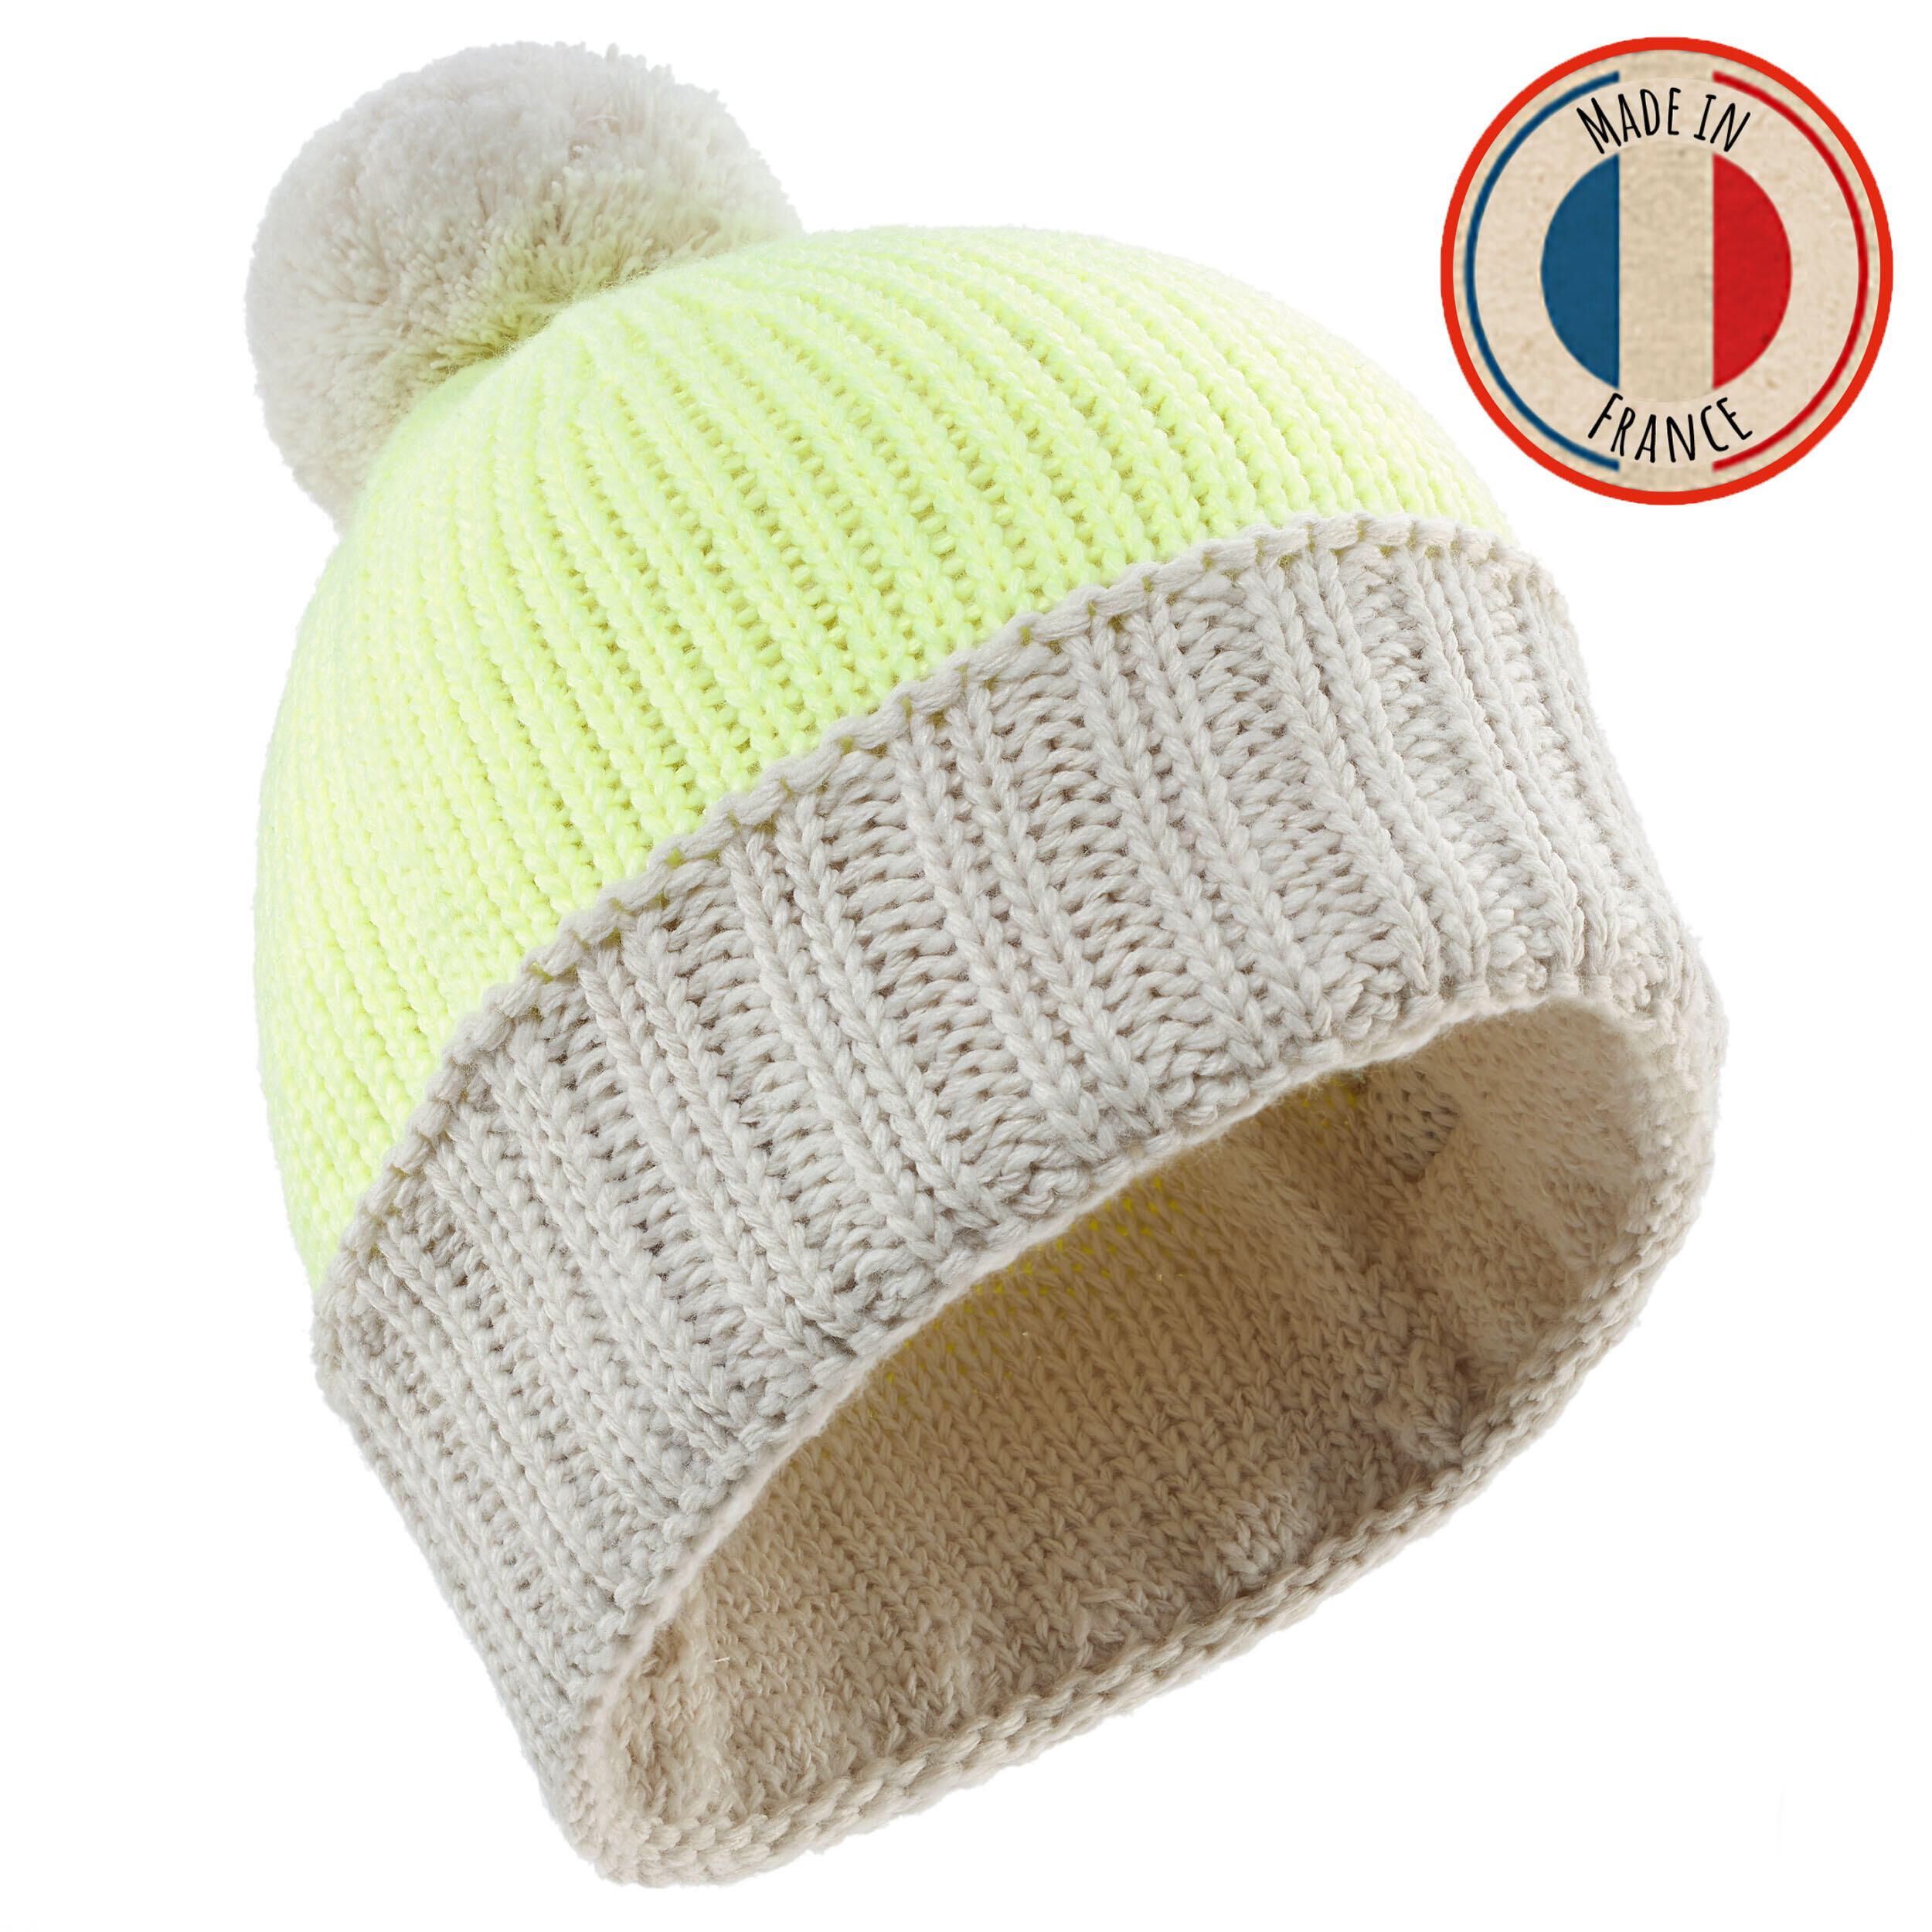 WEDZE ADULT SKI HAT GRAND NORD MADE IN FRANCE BEIGE YELLOW